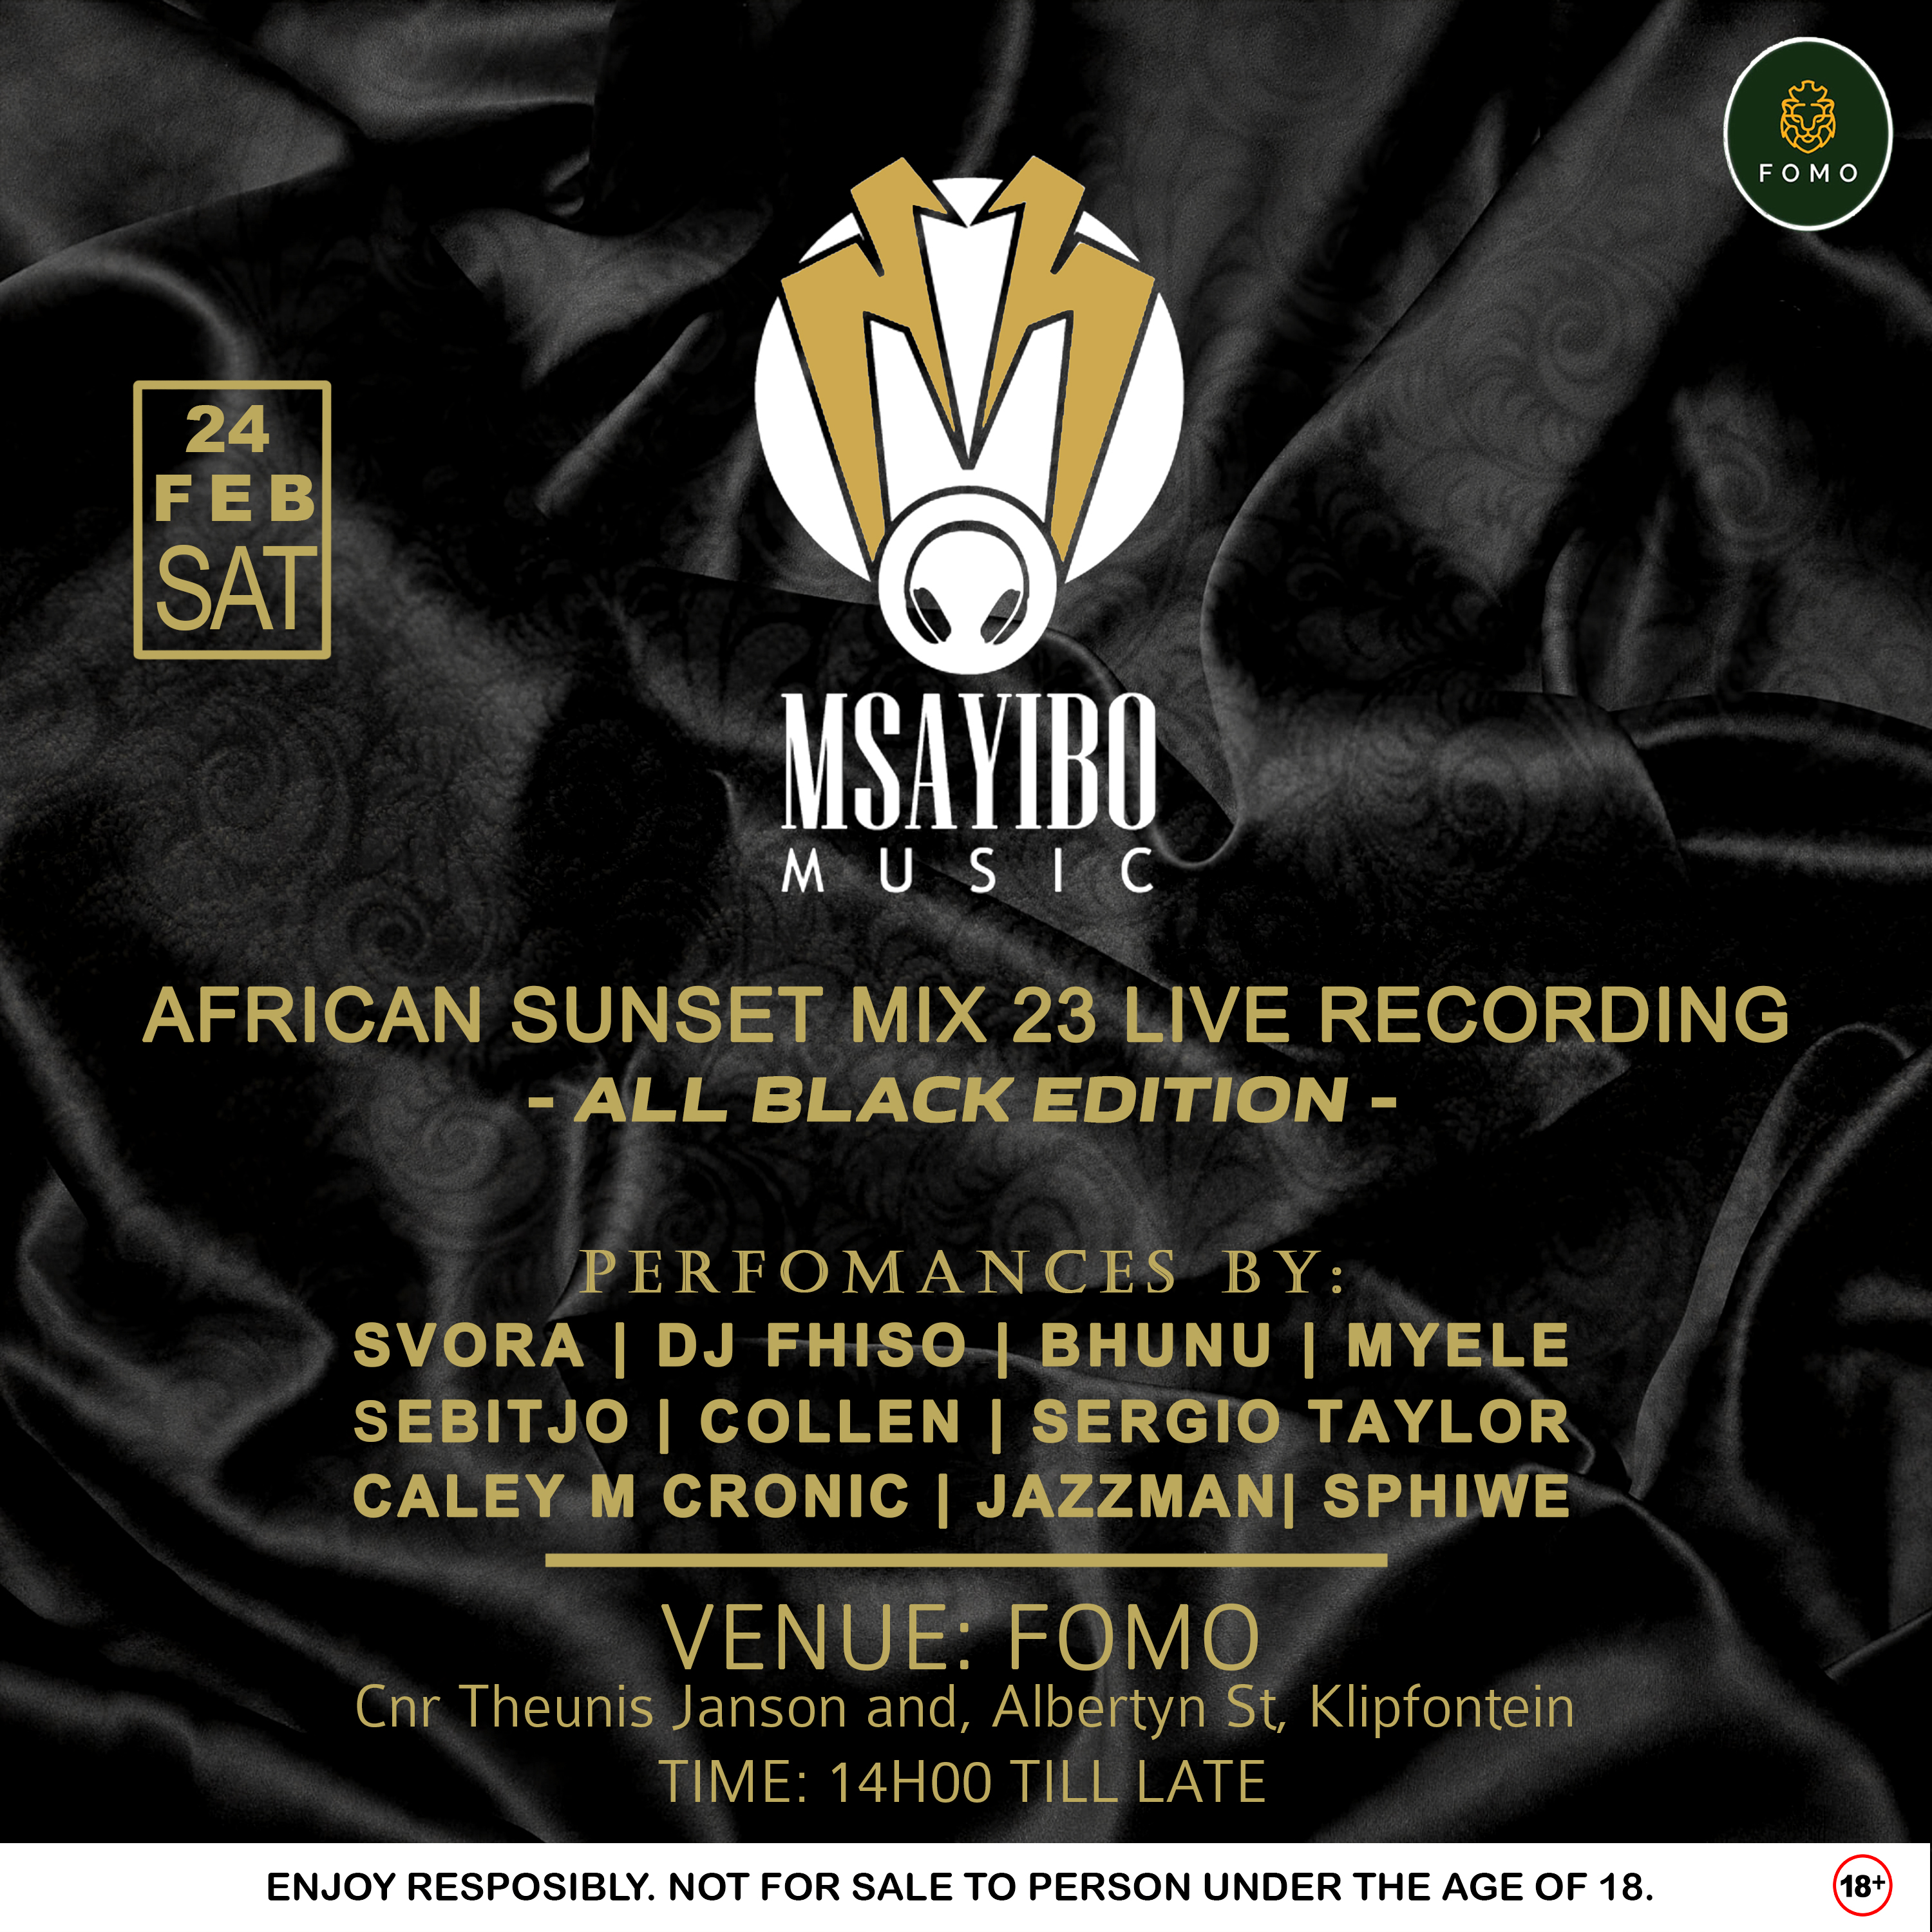 African Sunset Mix 23 Live Recording Poster